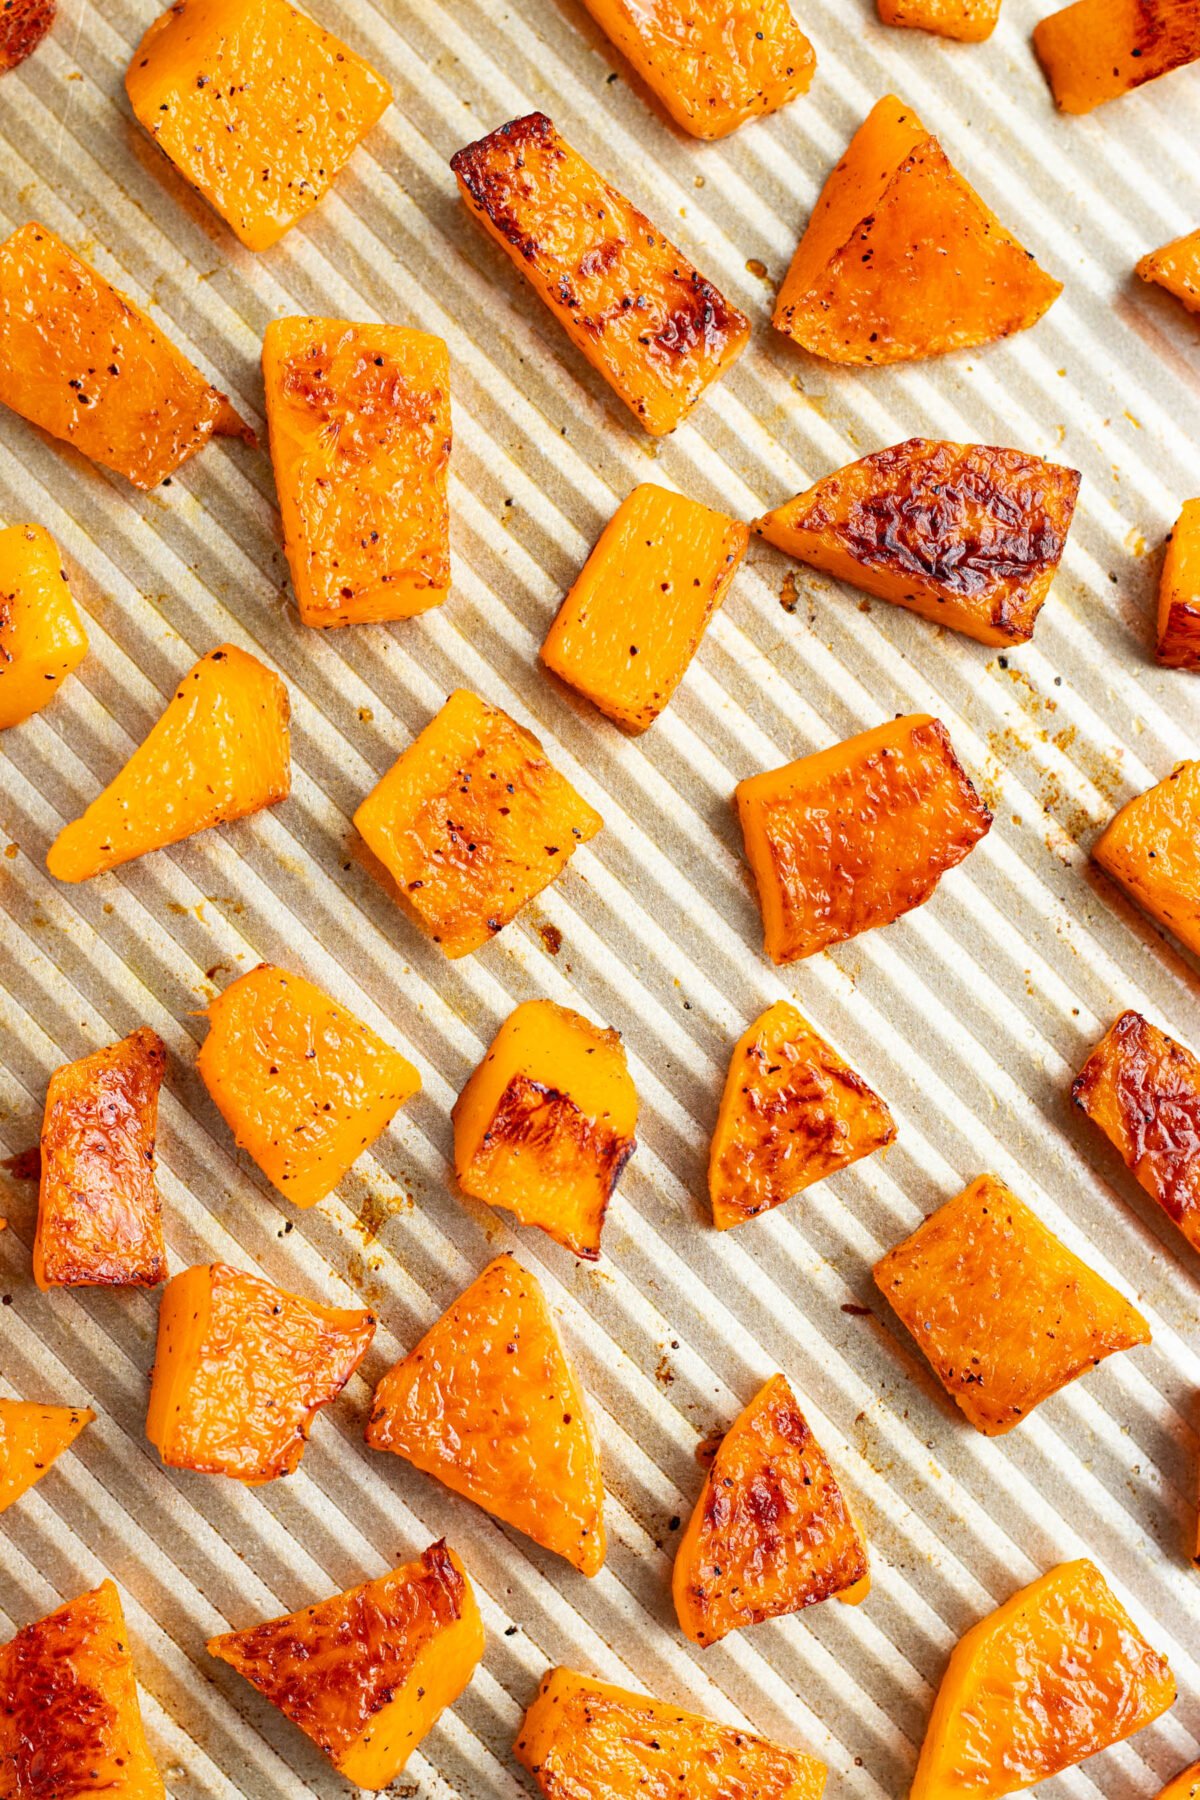 Cubed, oven-roasted butternut squash on a silver baking sheet.